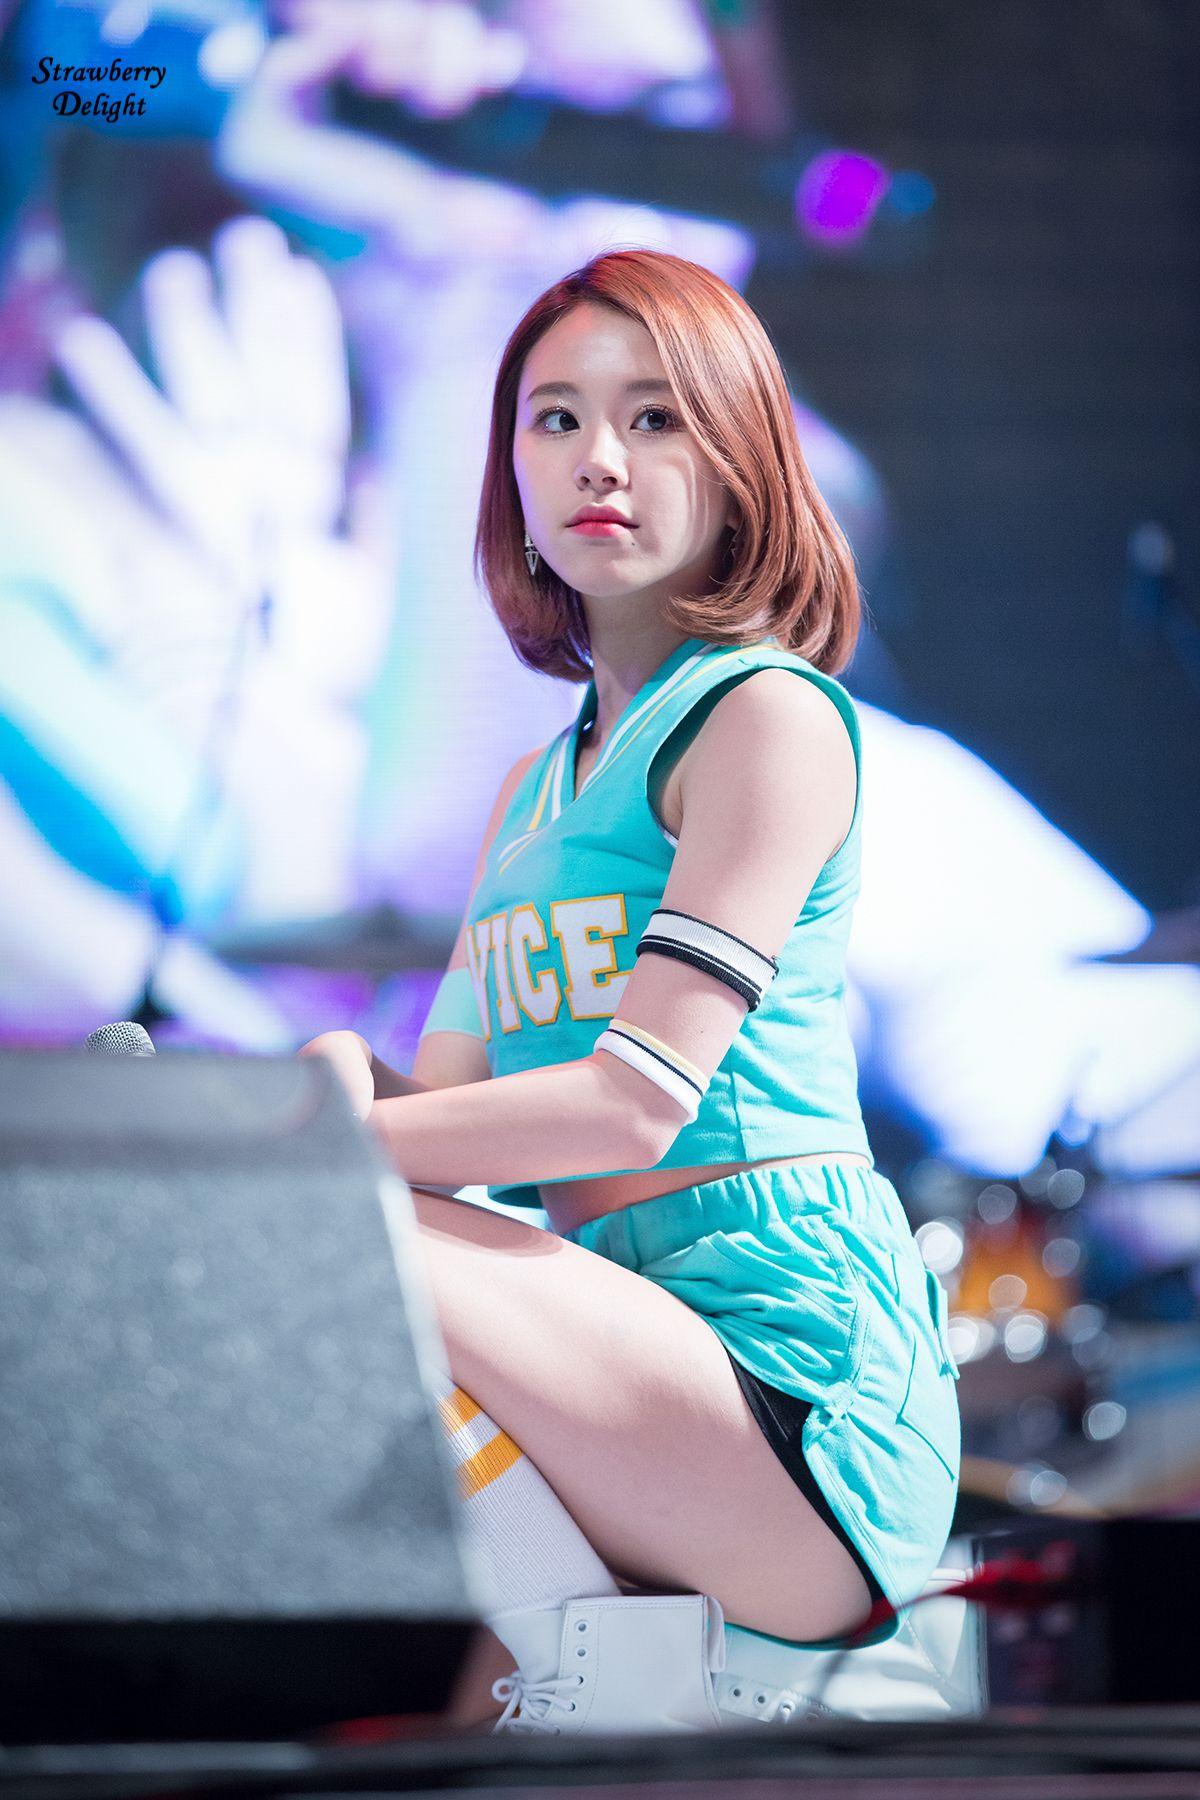 Son Chaeyoung Android IPhone Wallpaper KPOP Image